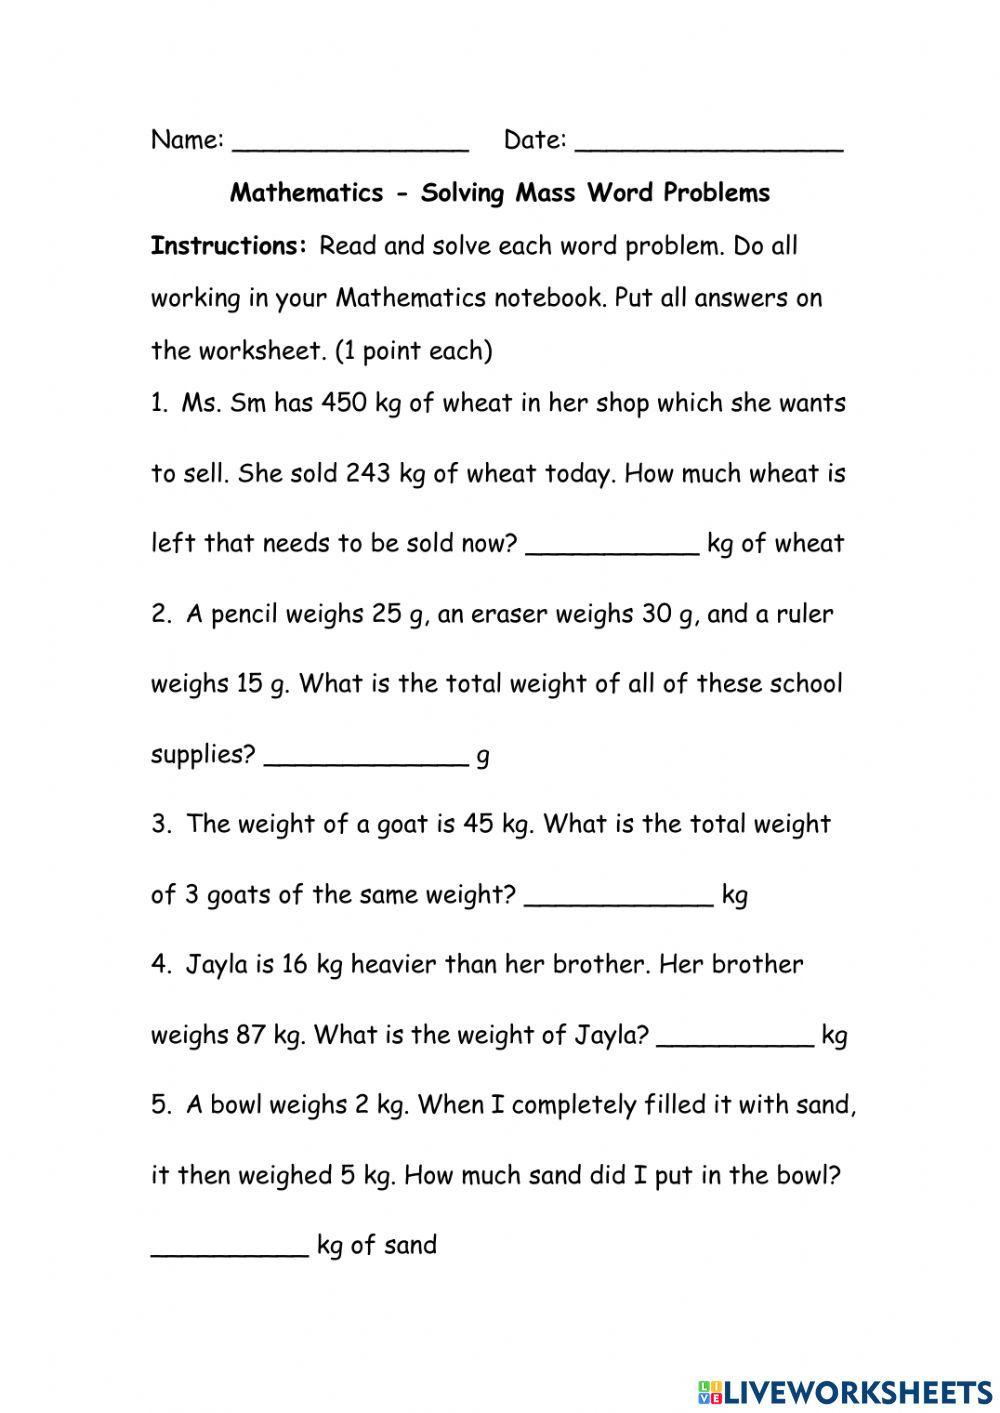 Solving Mass Word Problems